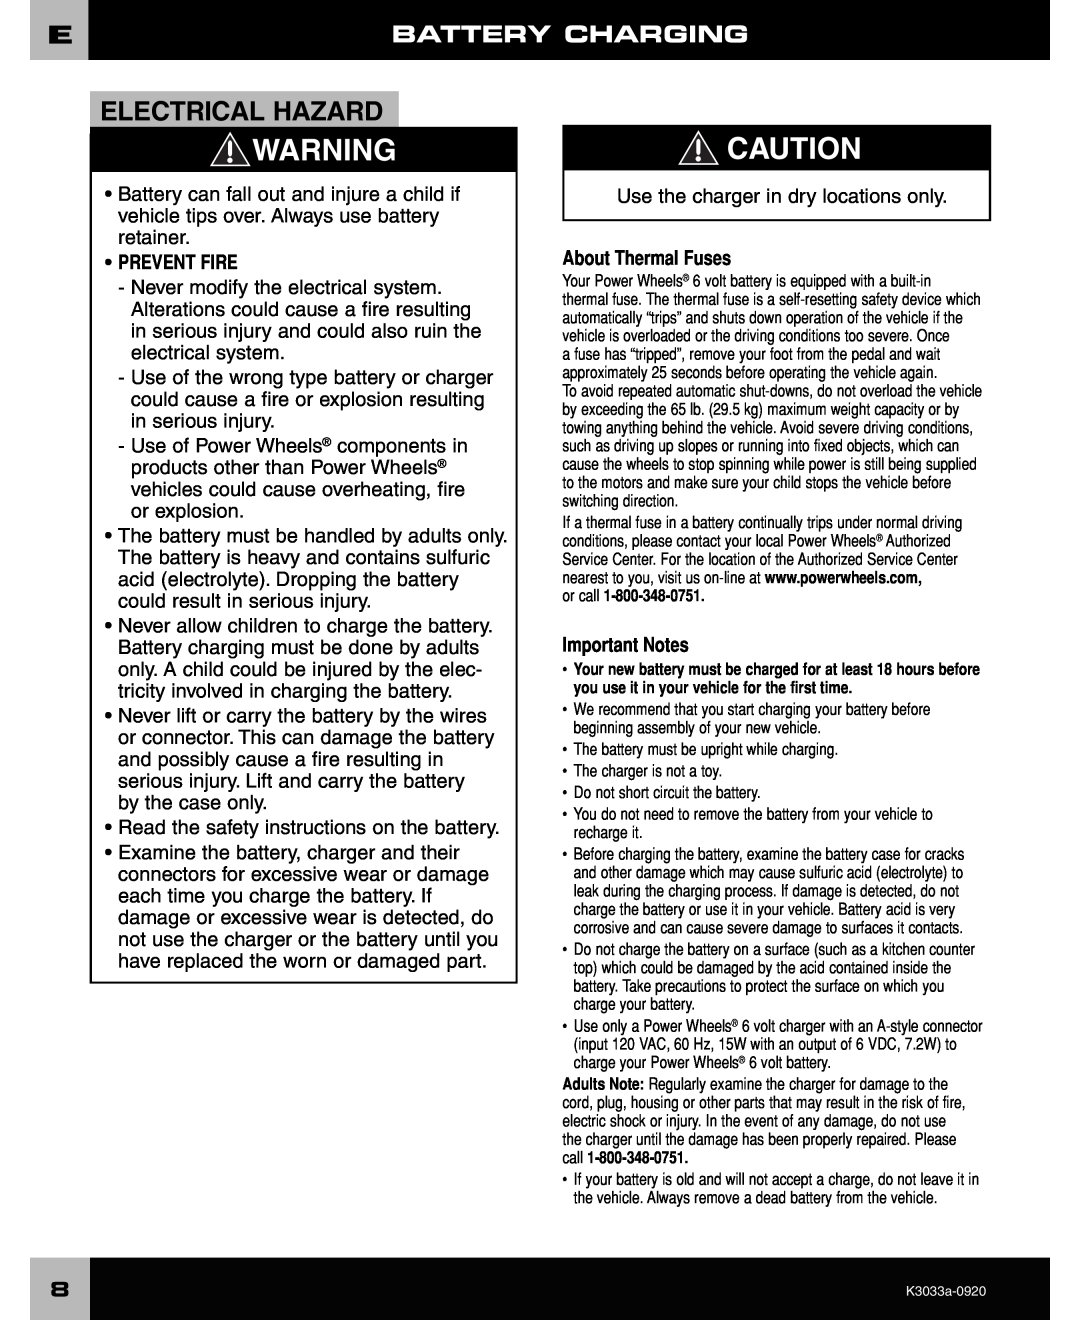 Ford F-150 owner manual Battery Charging, About Thermal Fuses, Important Notes, Electrical Hazard, Prevent Fire 